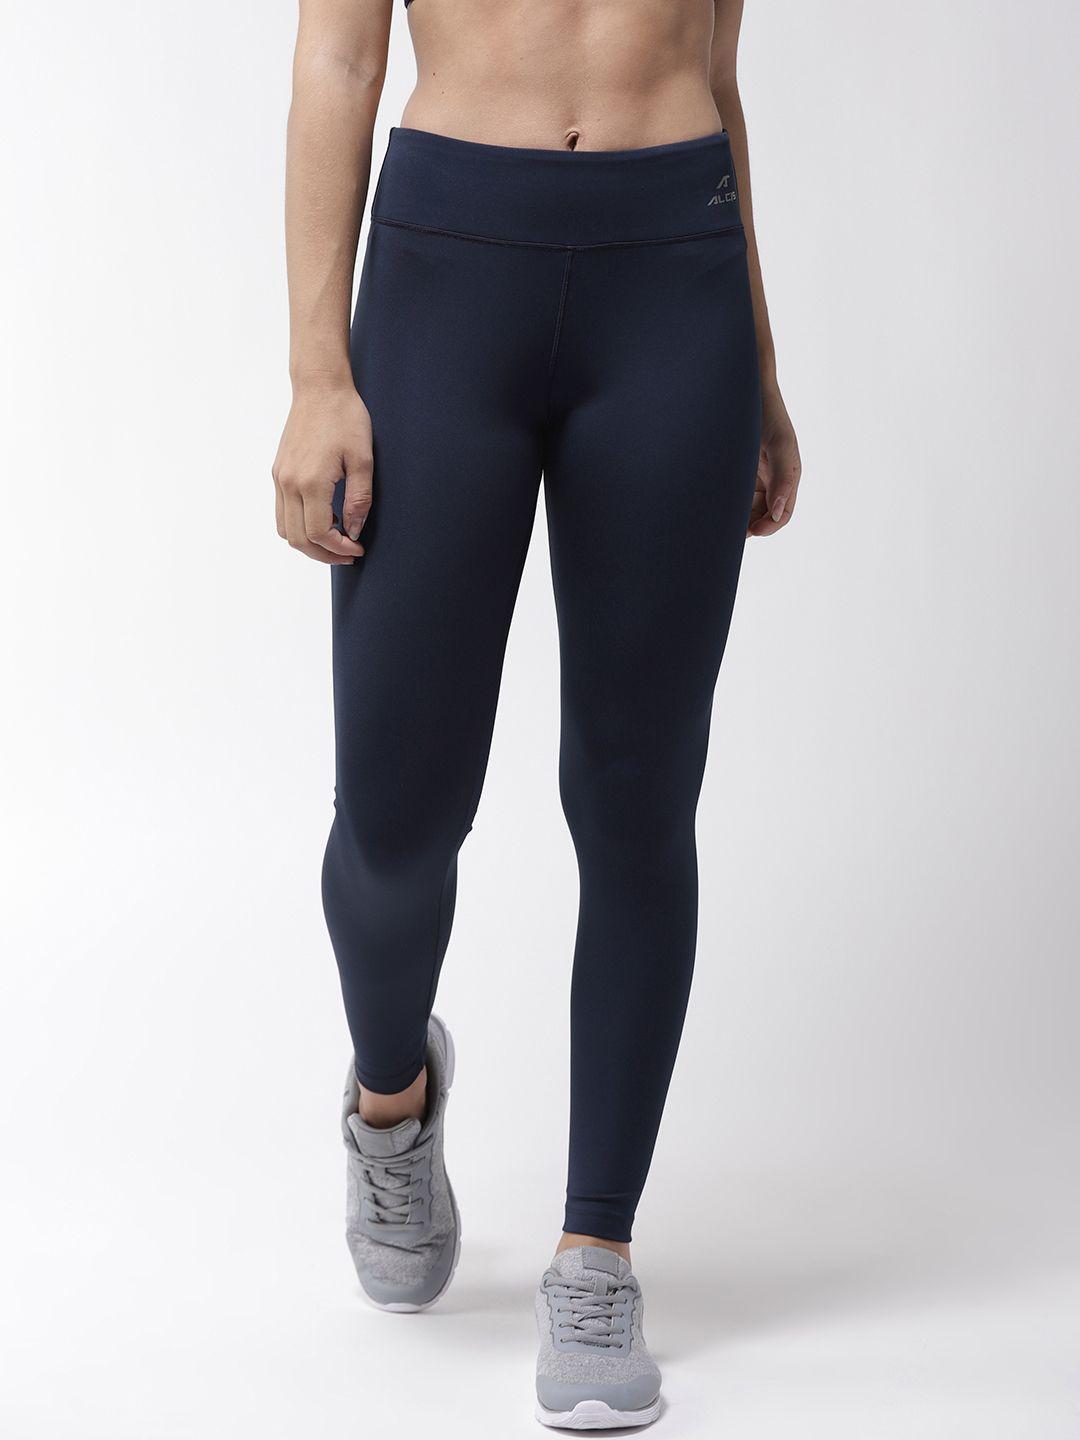 alcis-women-navy-blue-solid-training-tights